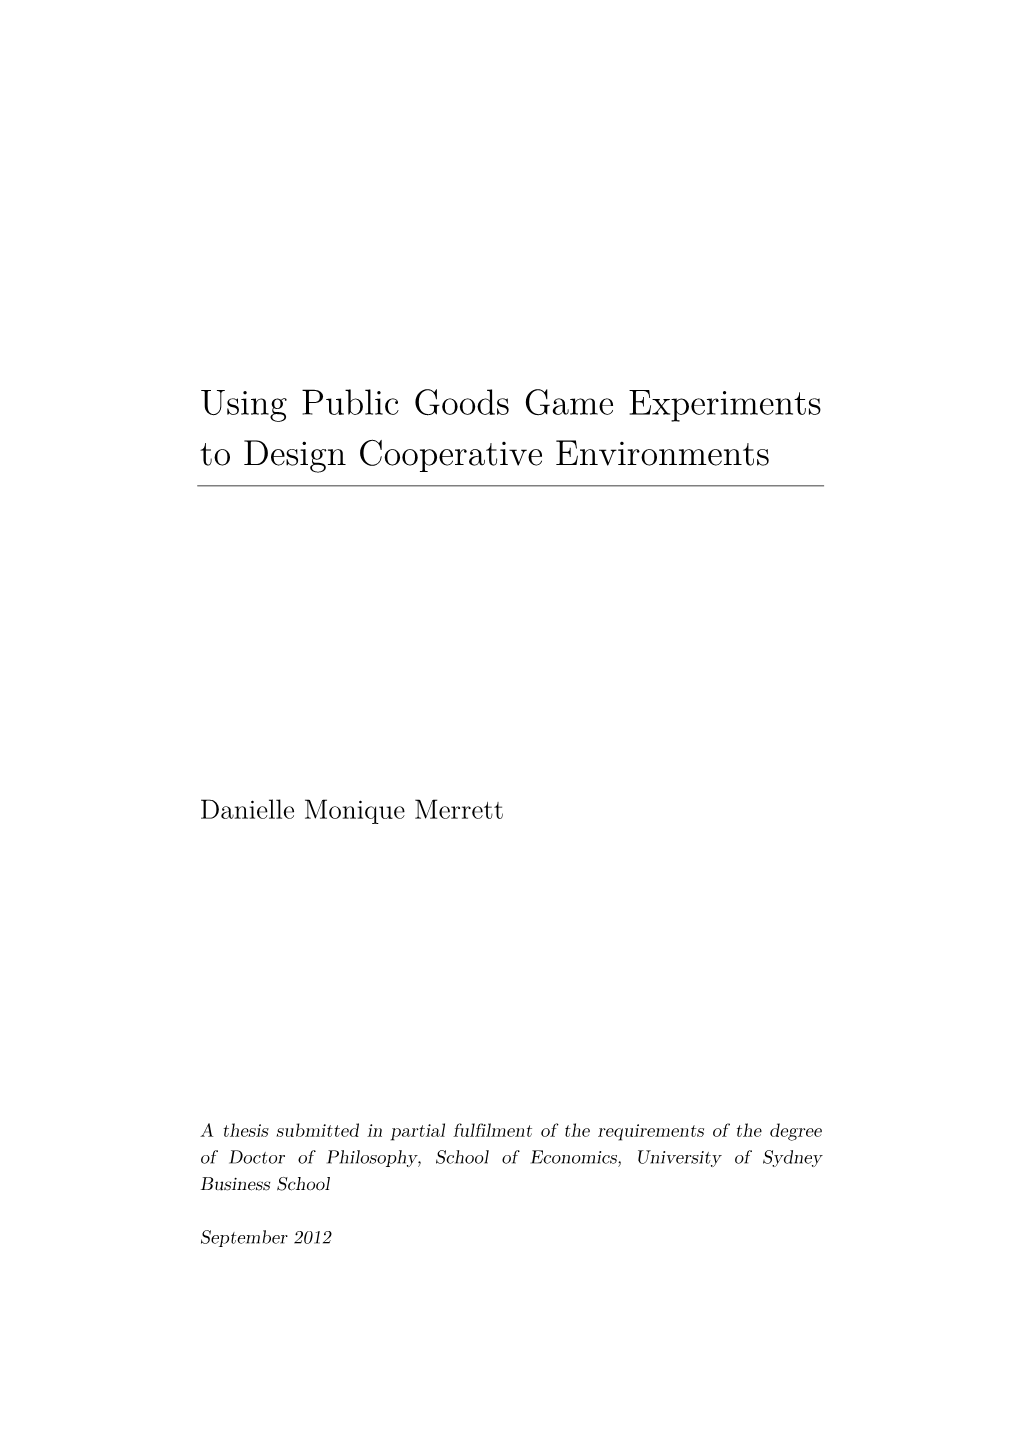 Using Public Goods Game Experiments to Design Cooperative Environments